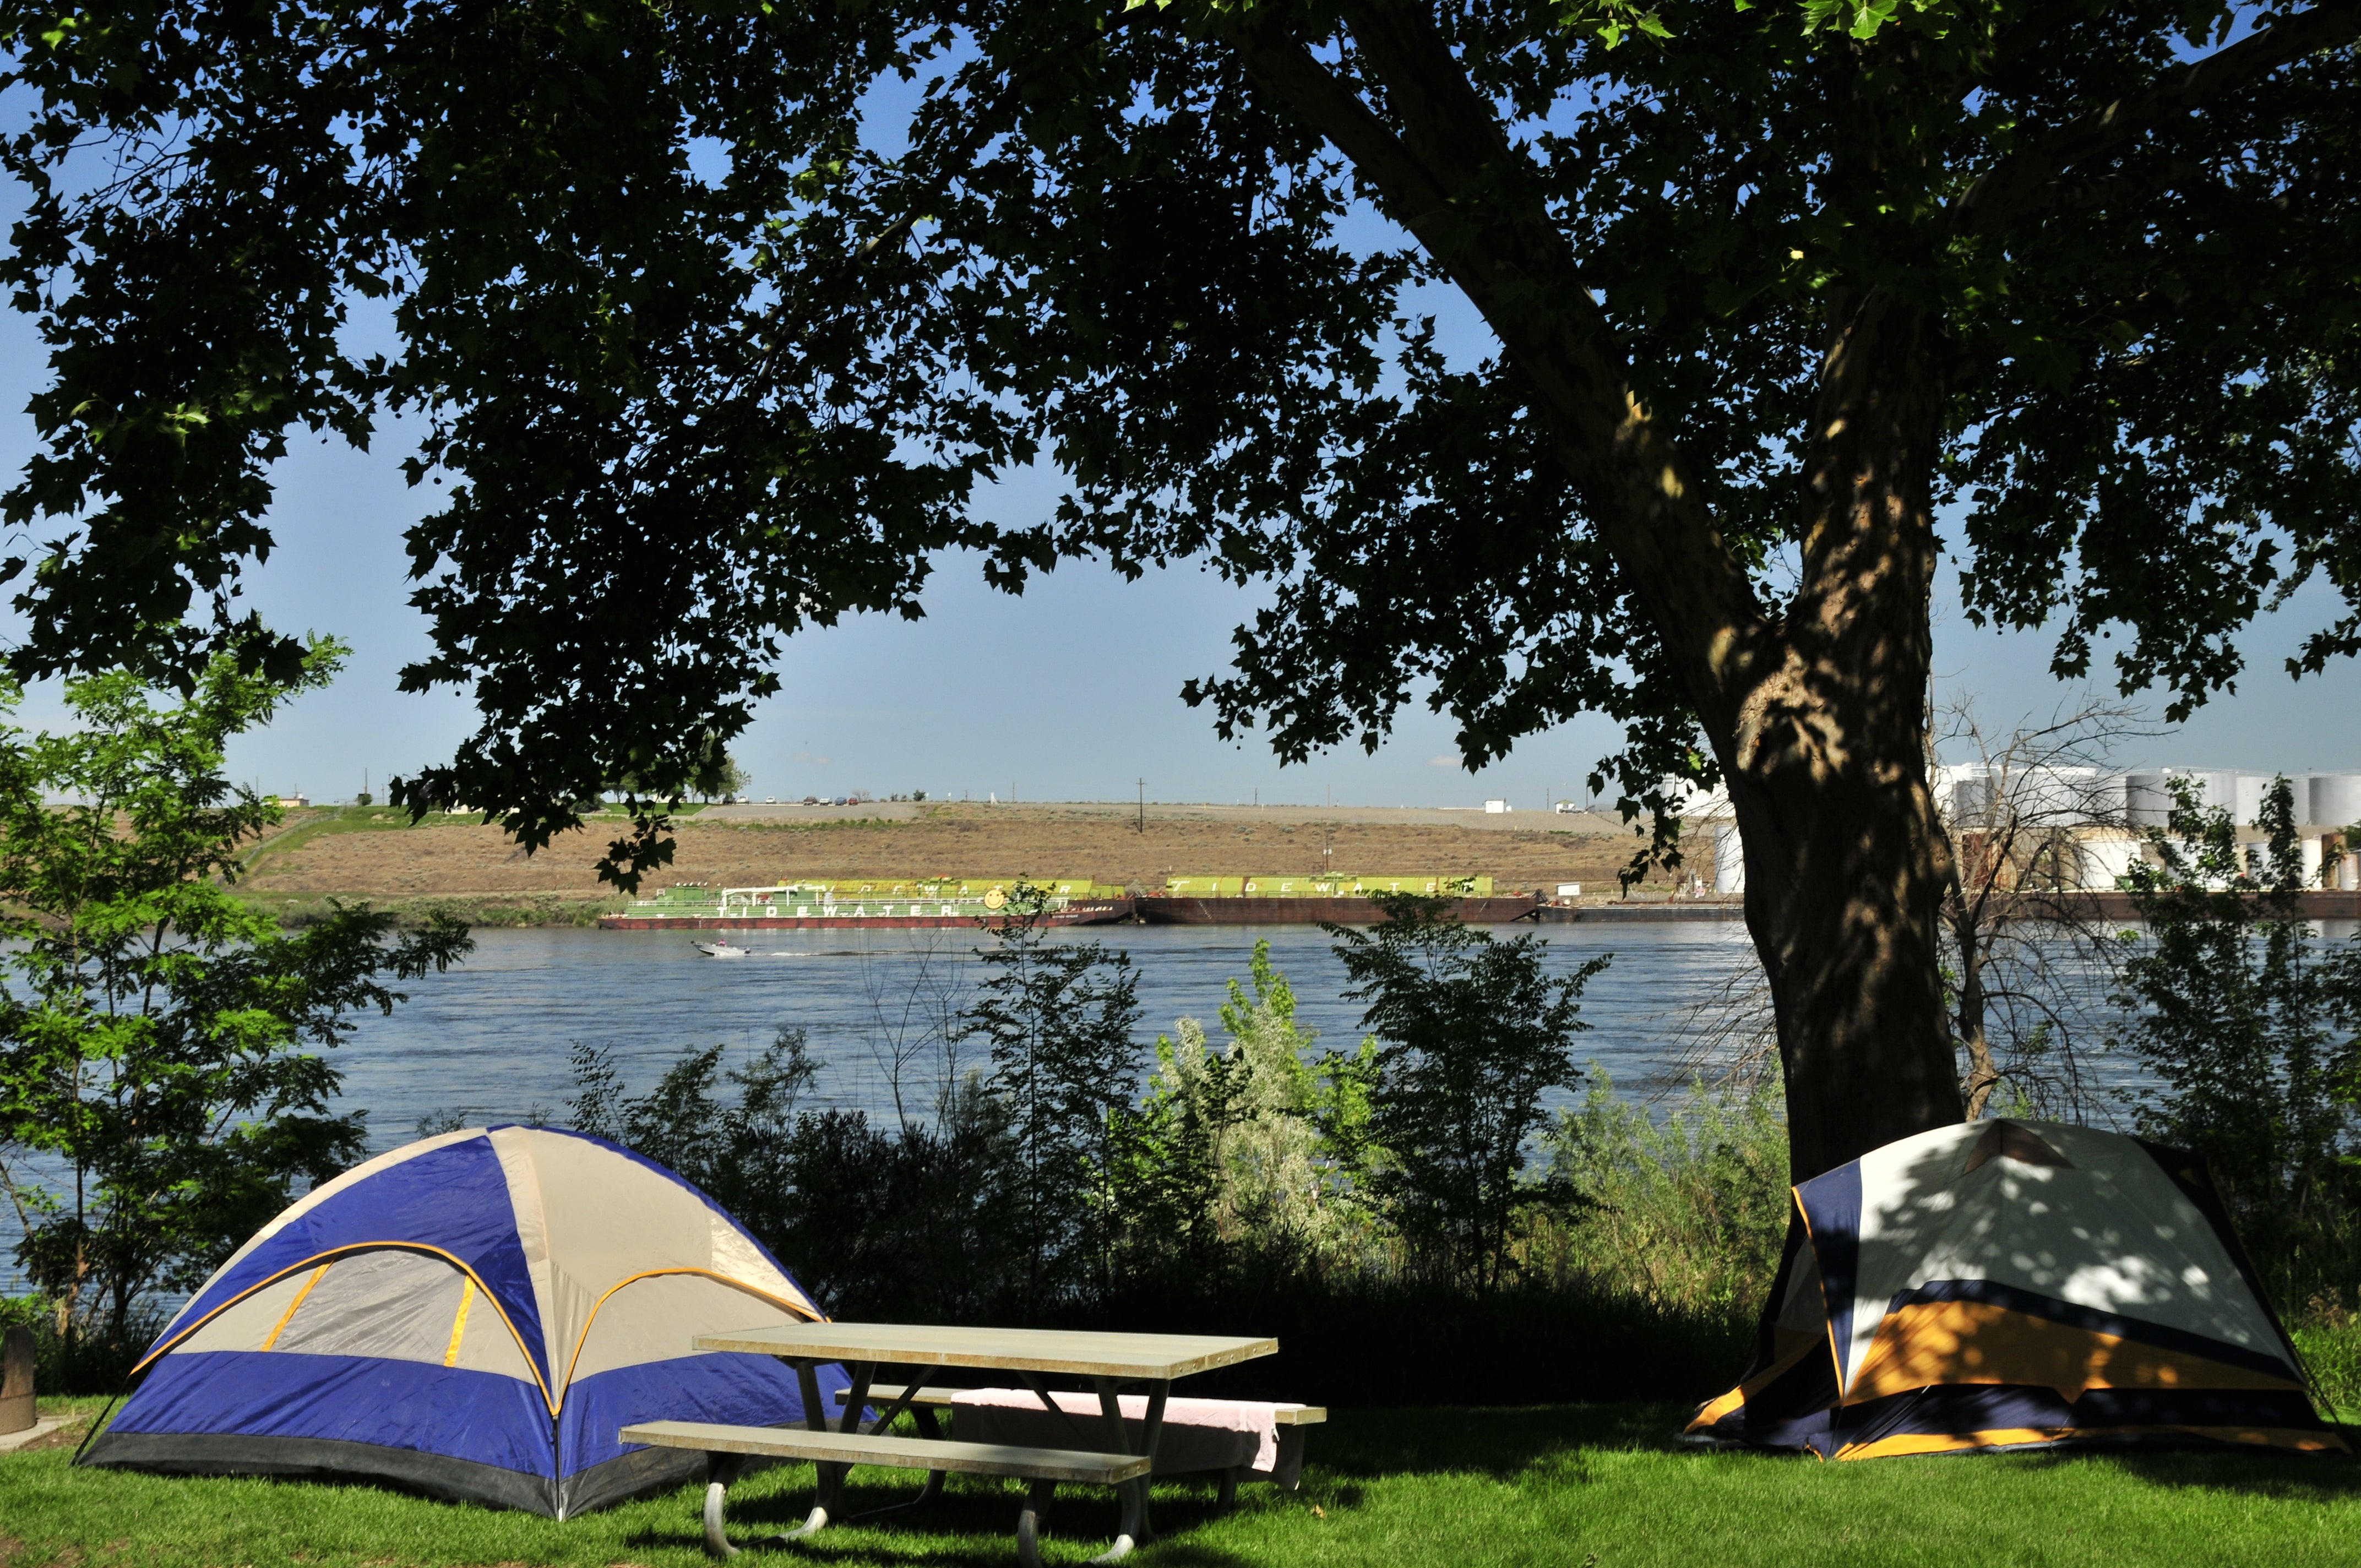 Camping along the river